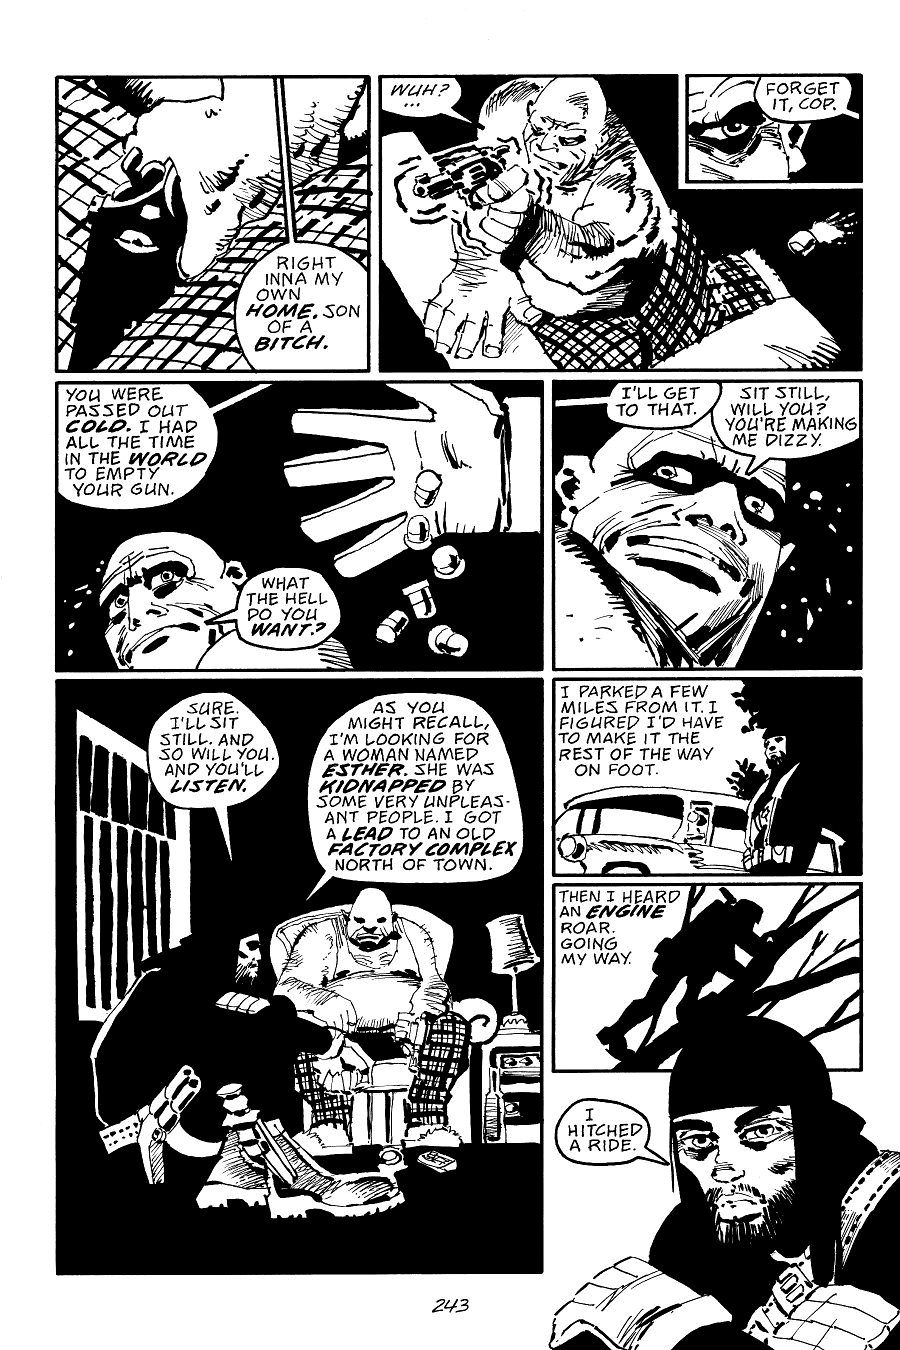 page 243 of sin city 7 hell and back